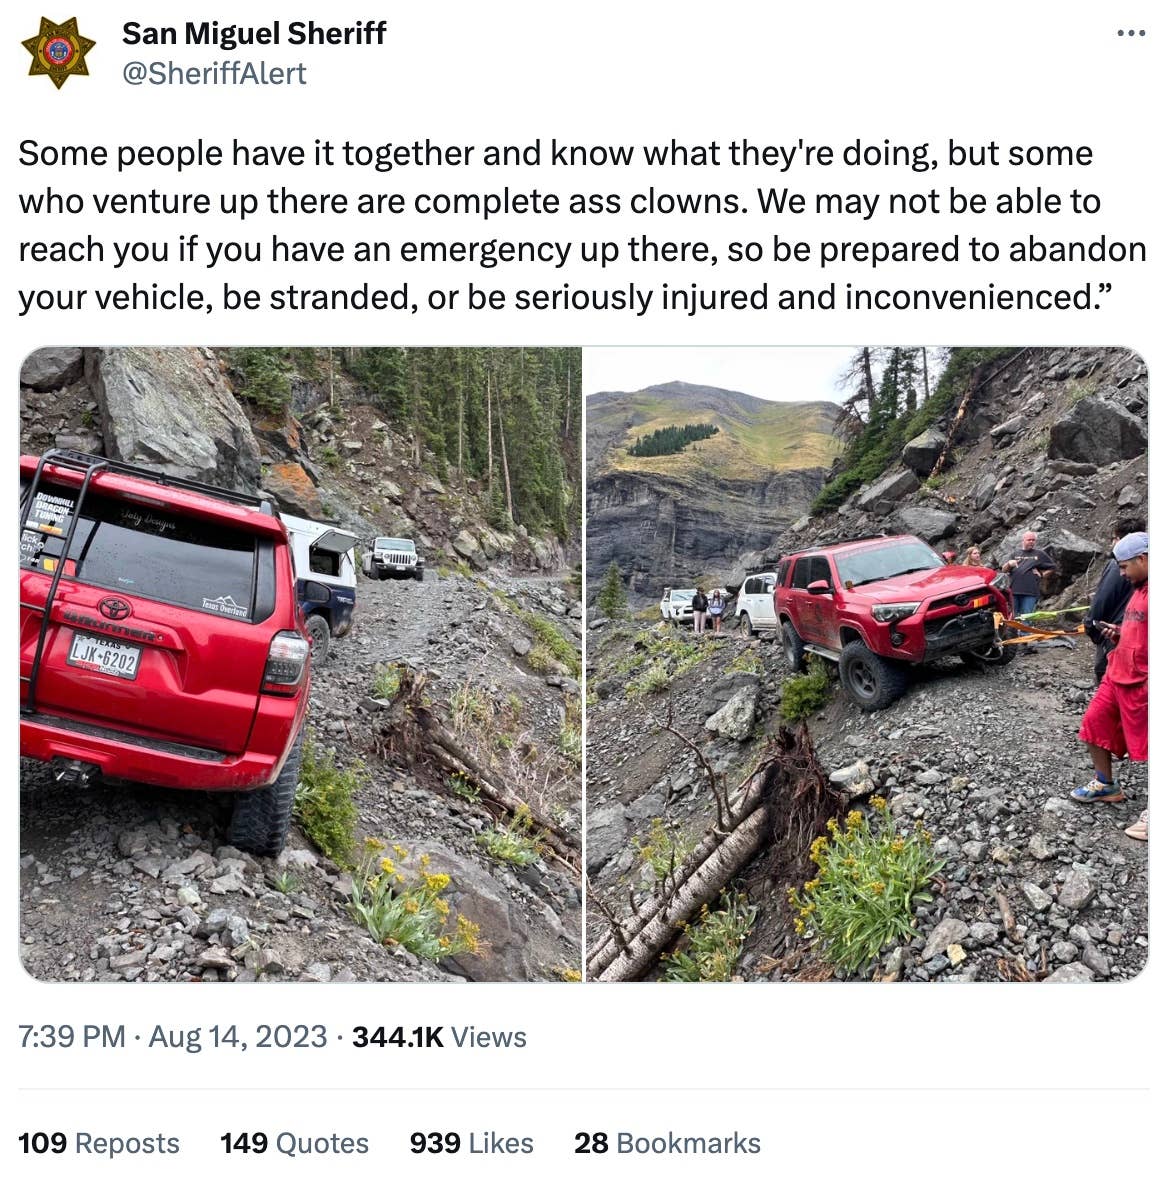 San Miguel Sheriff lambasts an incompetent off-roader on social media, calling them &quot;complete ass clowns&quot;